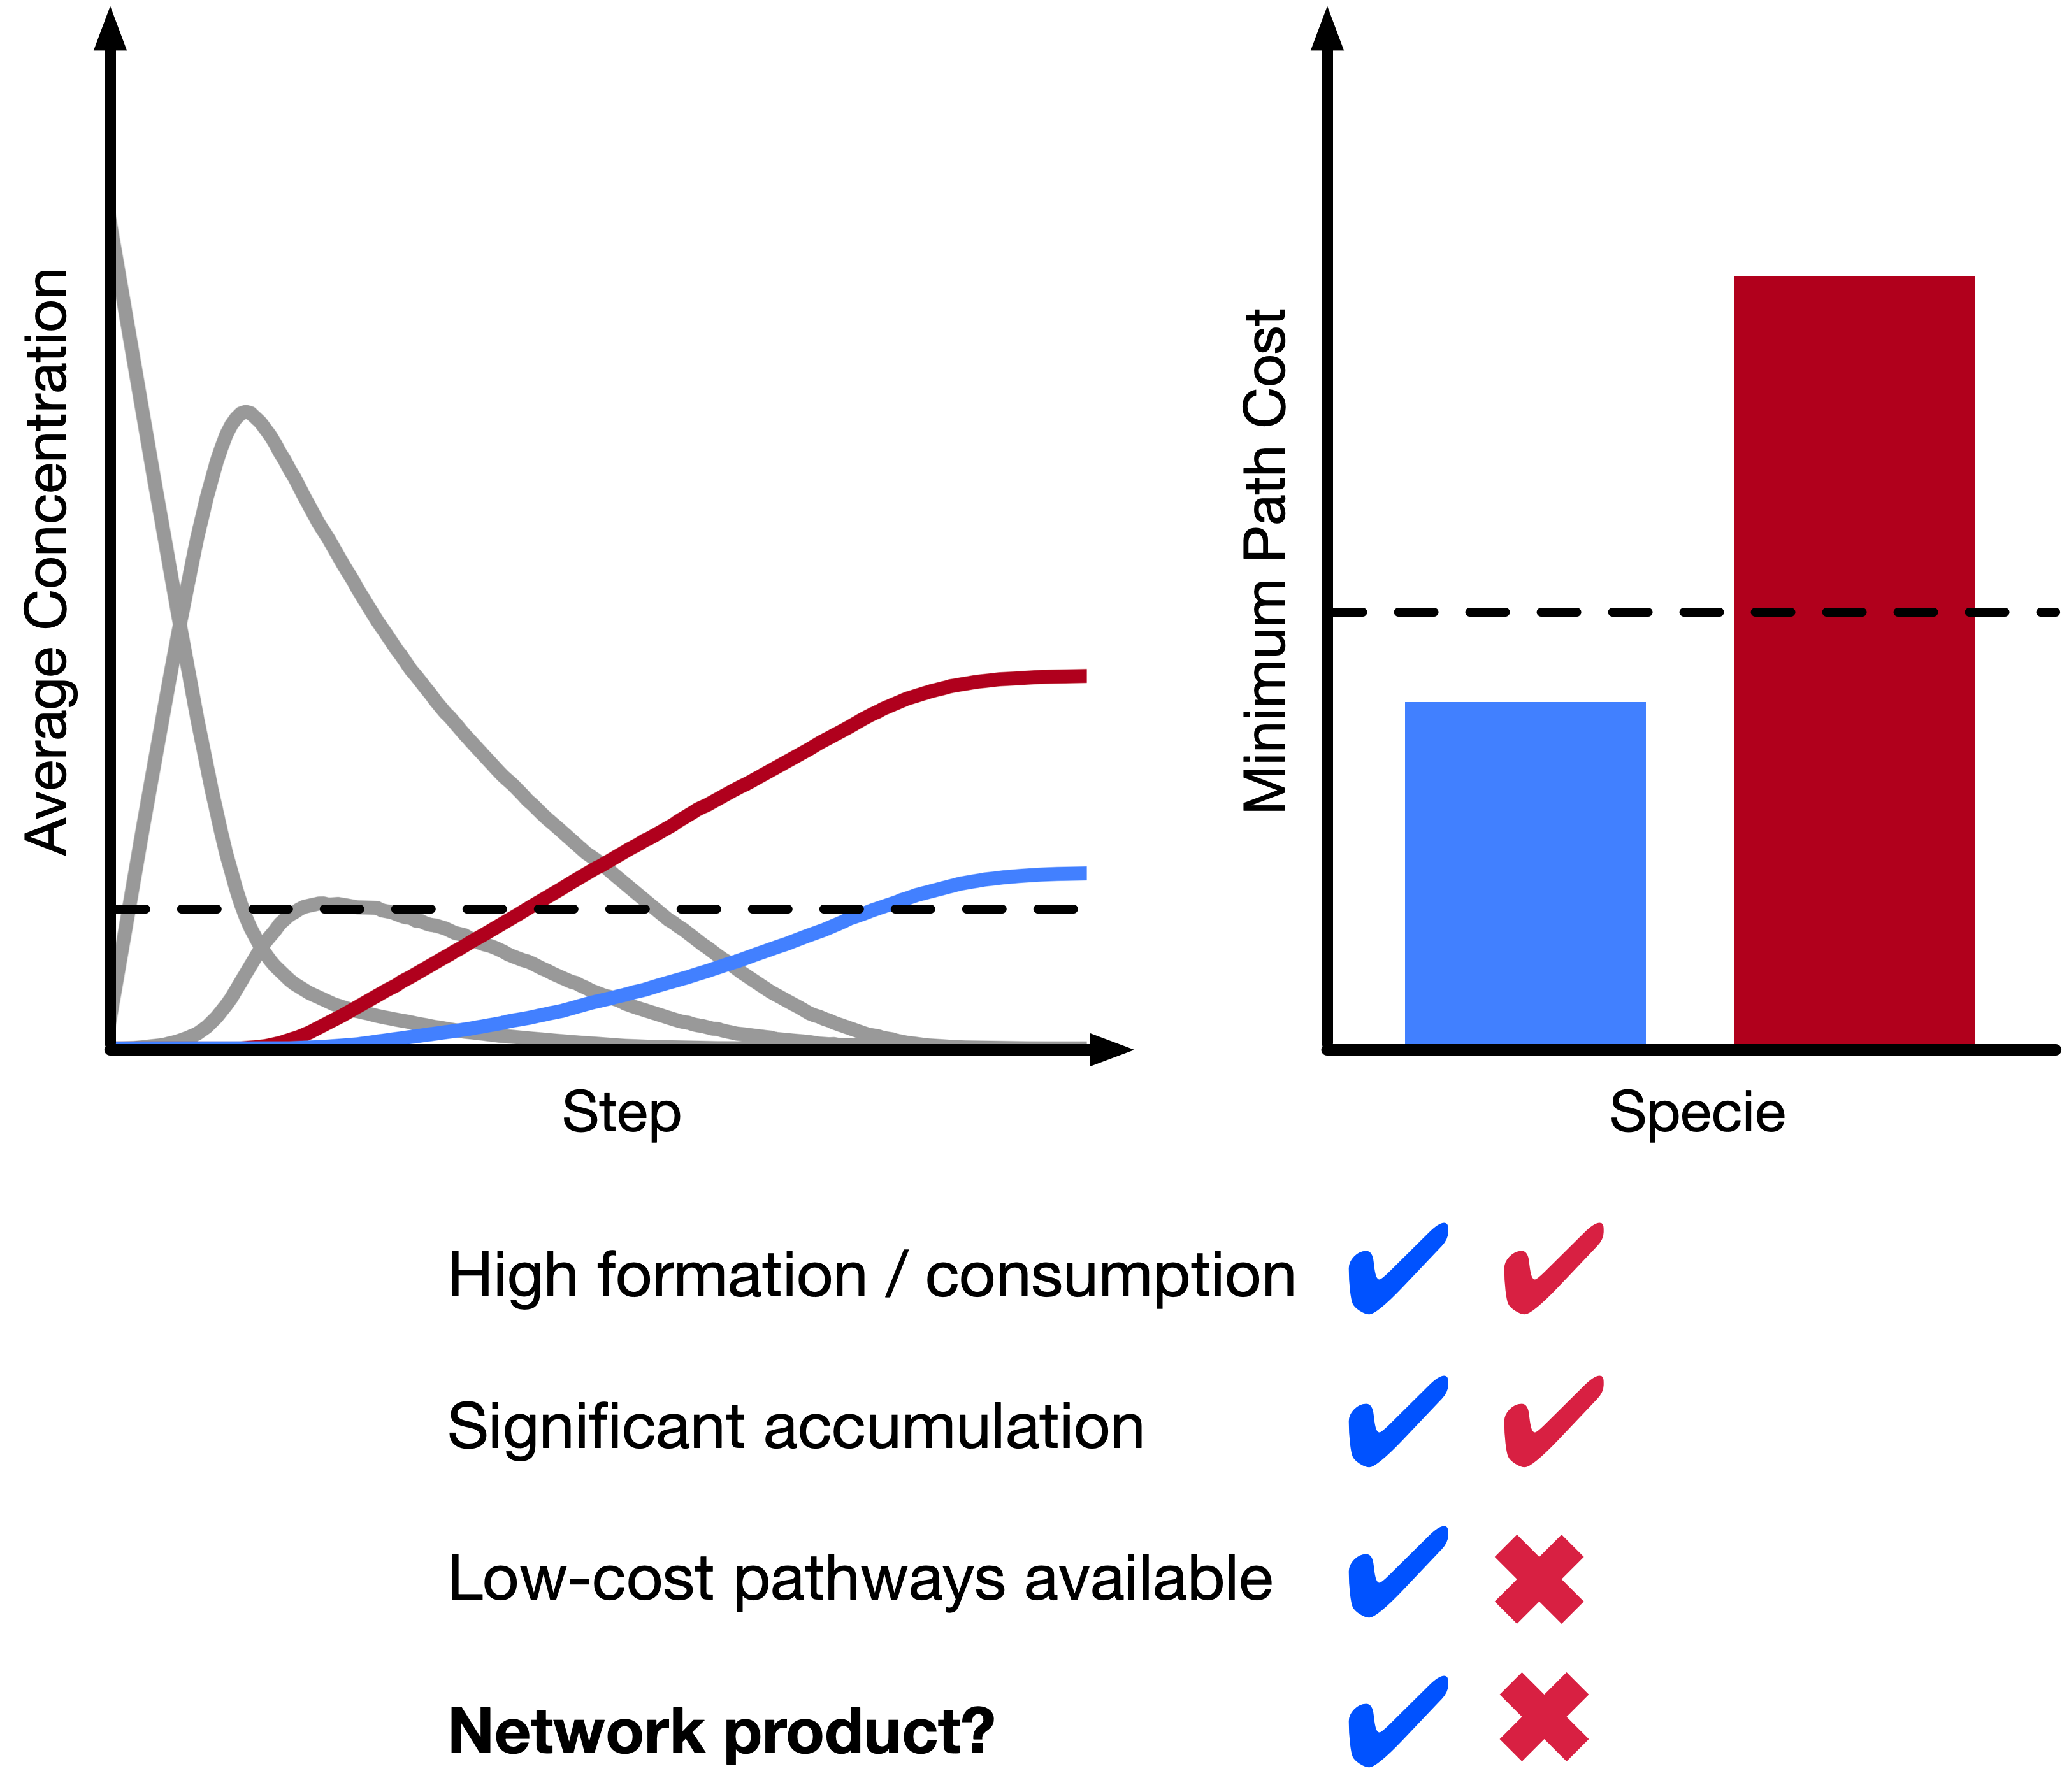 Stochastic sampling of reaction networks allows for identification of pathways and prediction of products in complex systems where little is initially known.